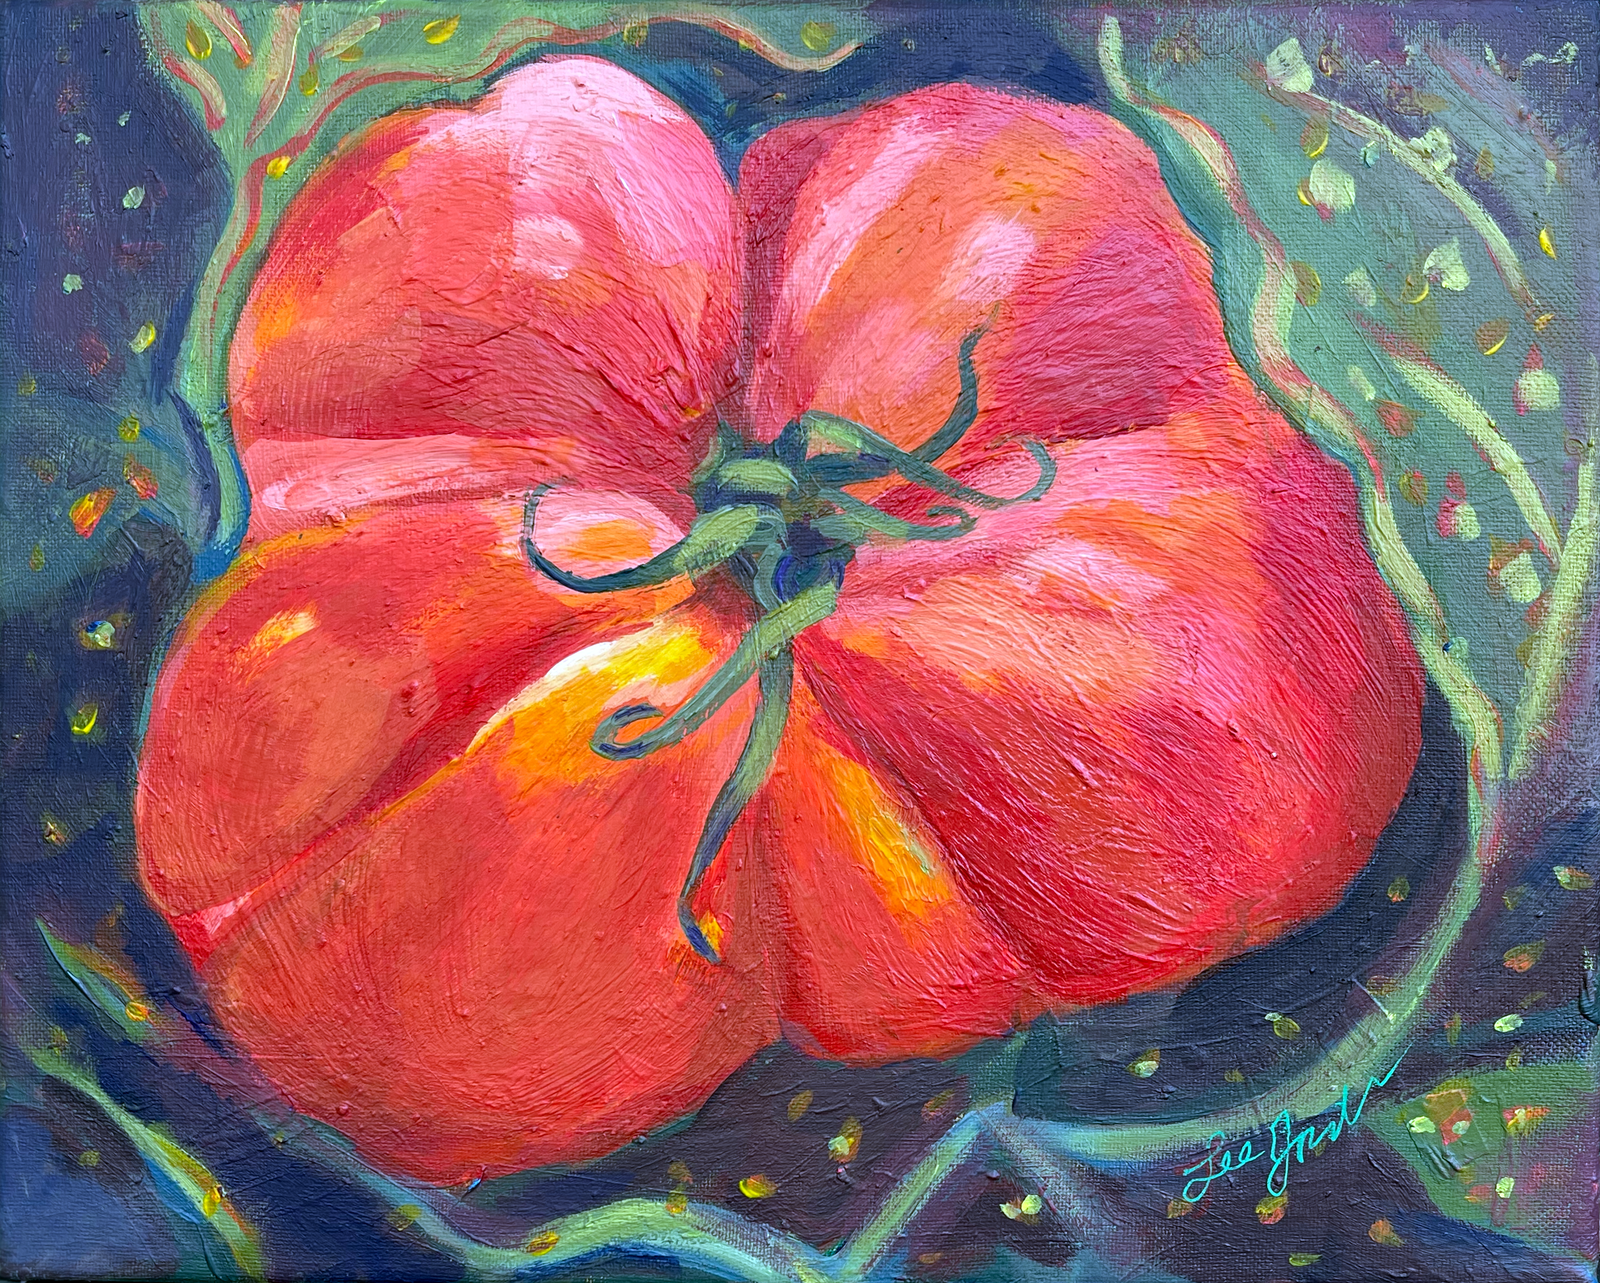 Juicy Bumps Heirloom Tomato #1, still life of a tomato painting, red with green vines